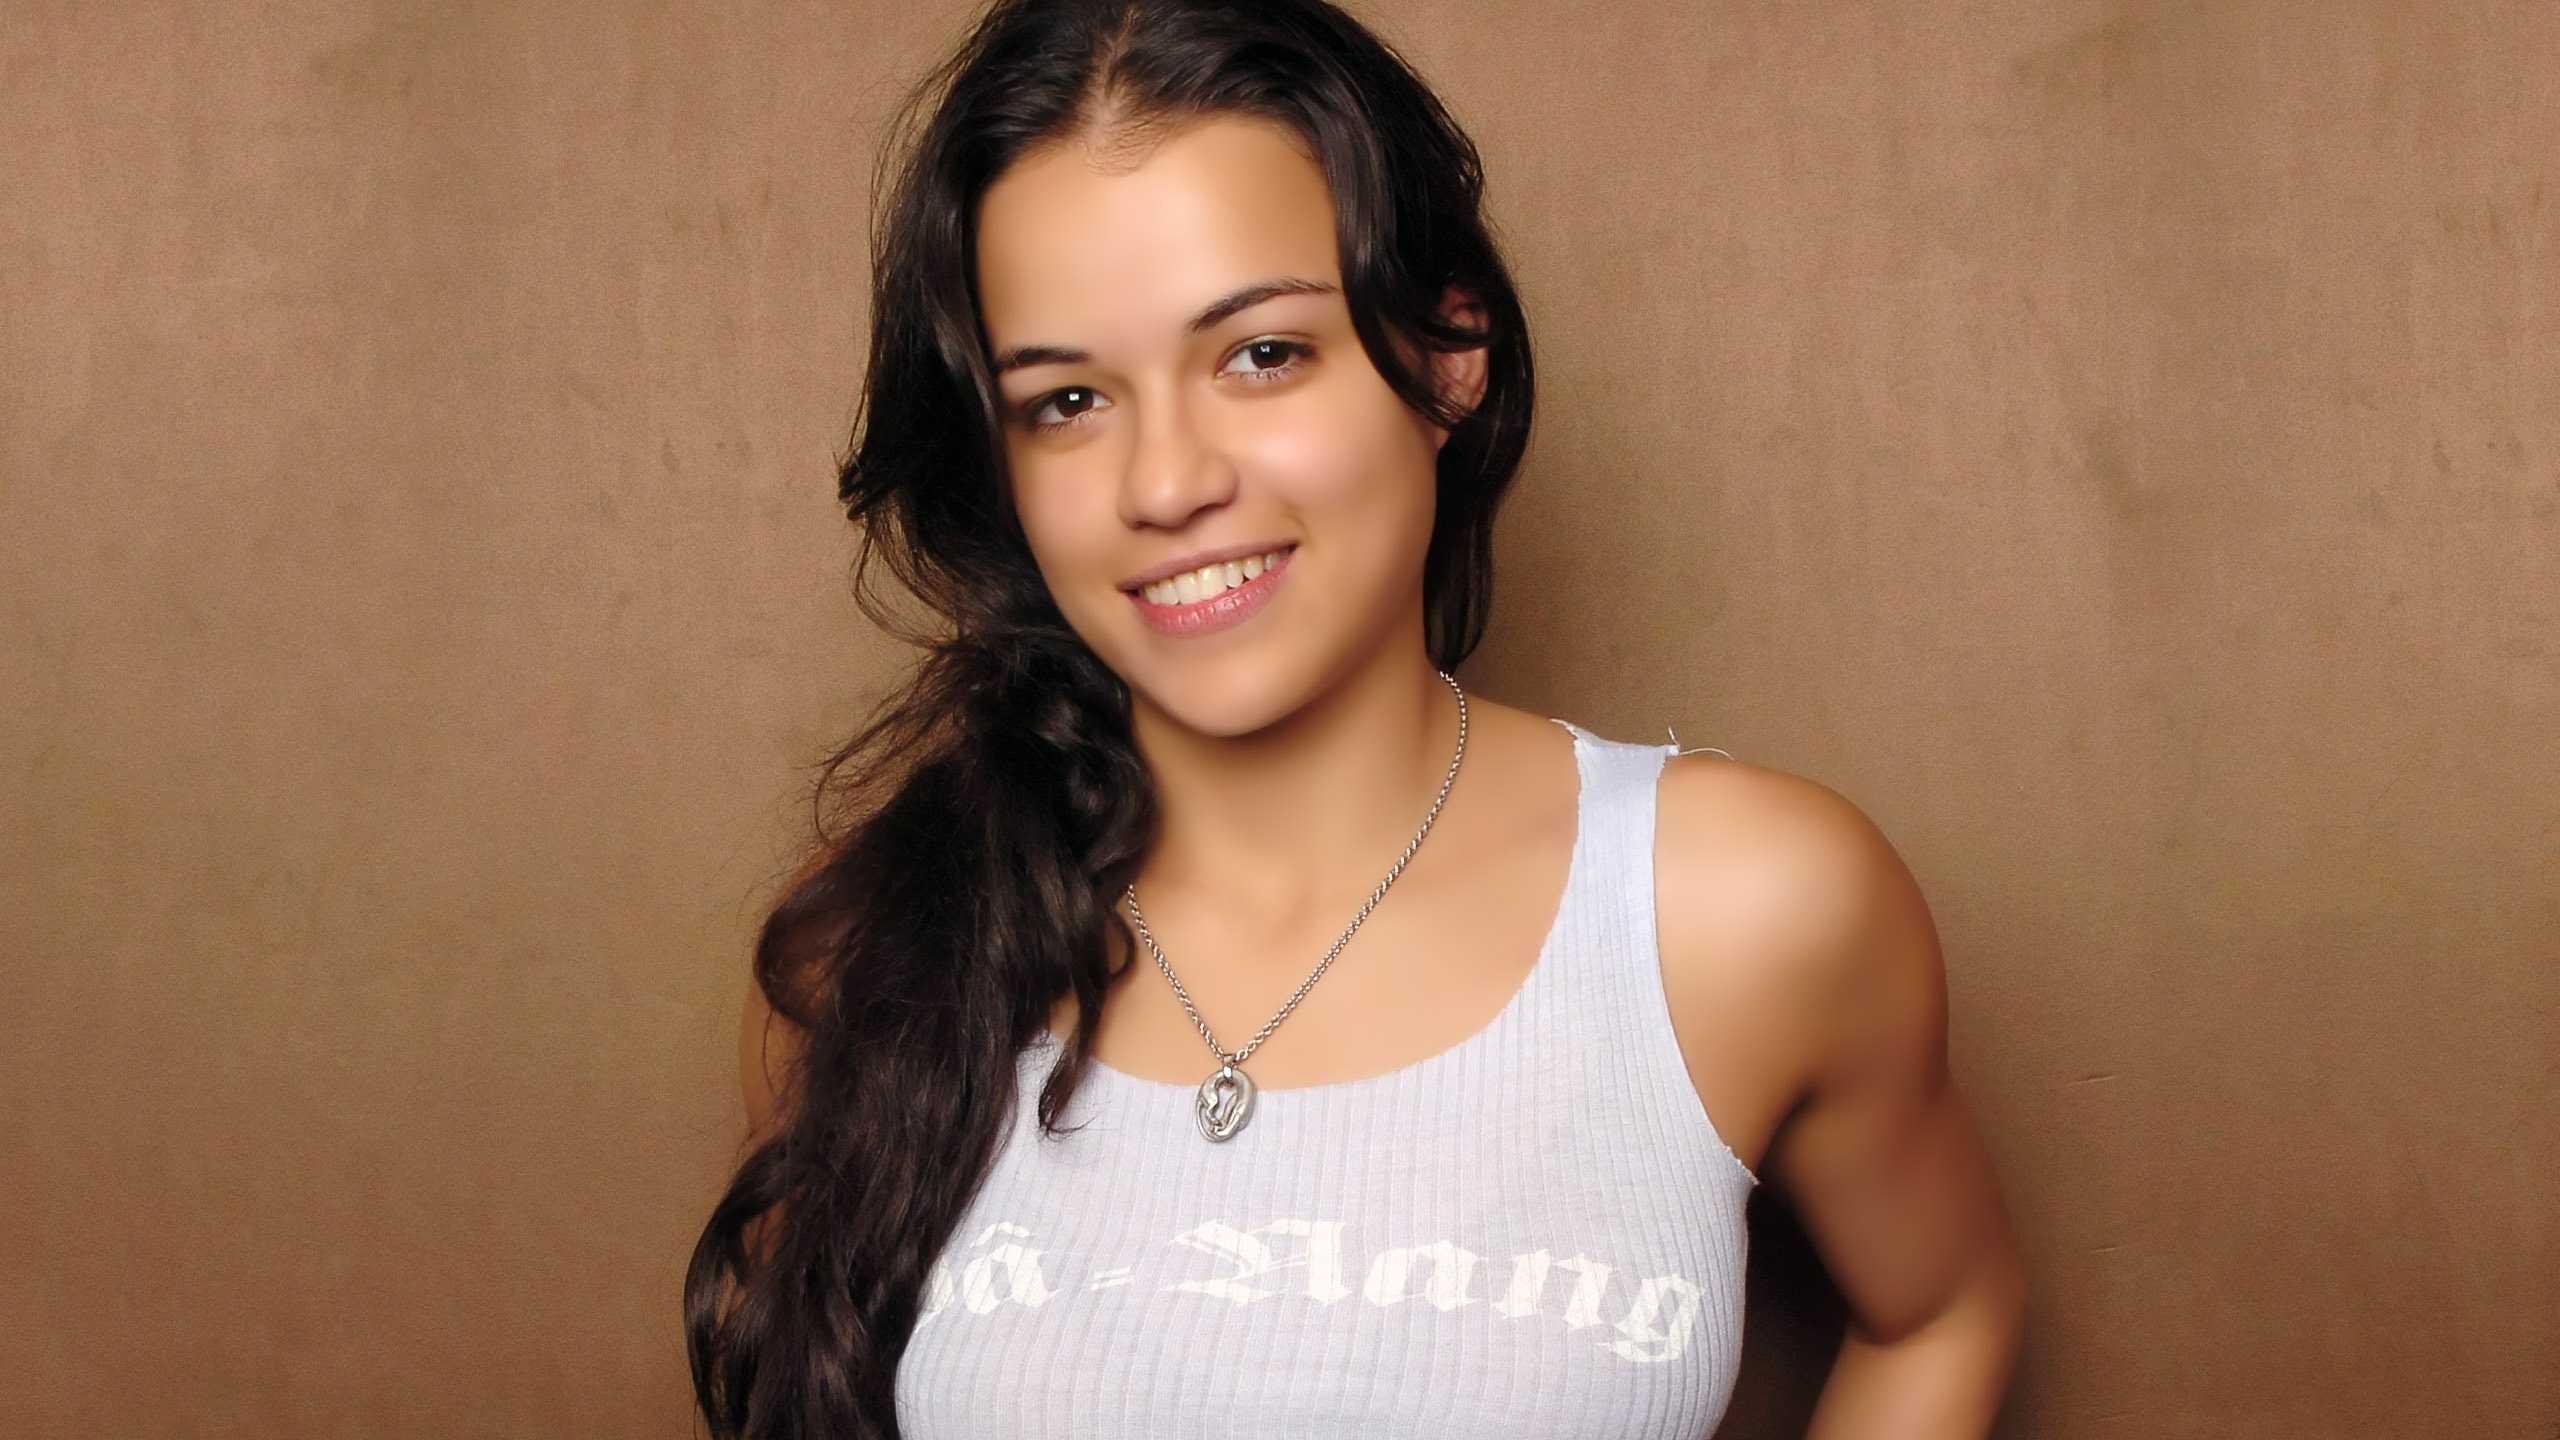 Michelle Rodriguez Smiling for 2560x1440 HDTV resolution